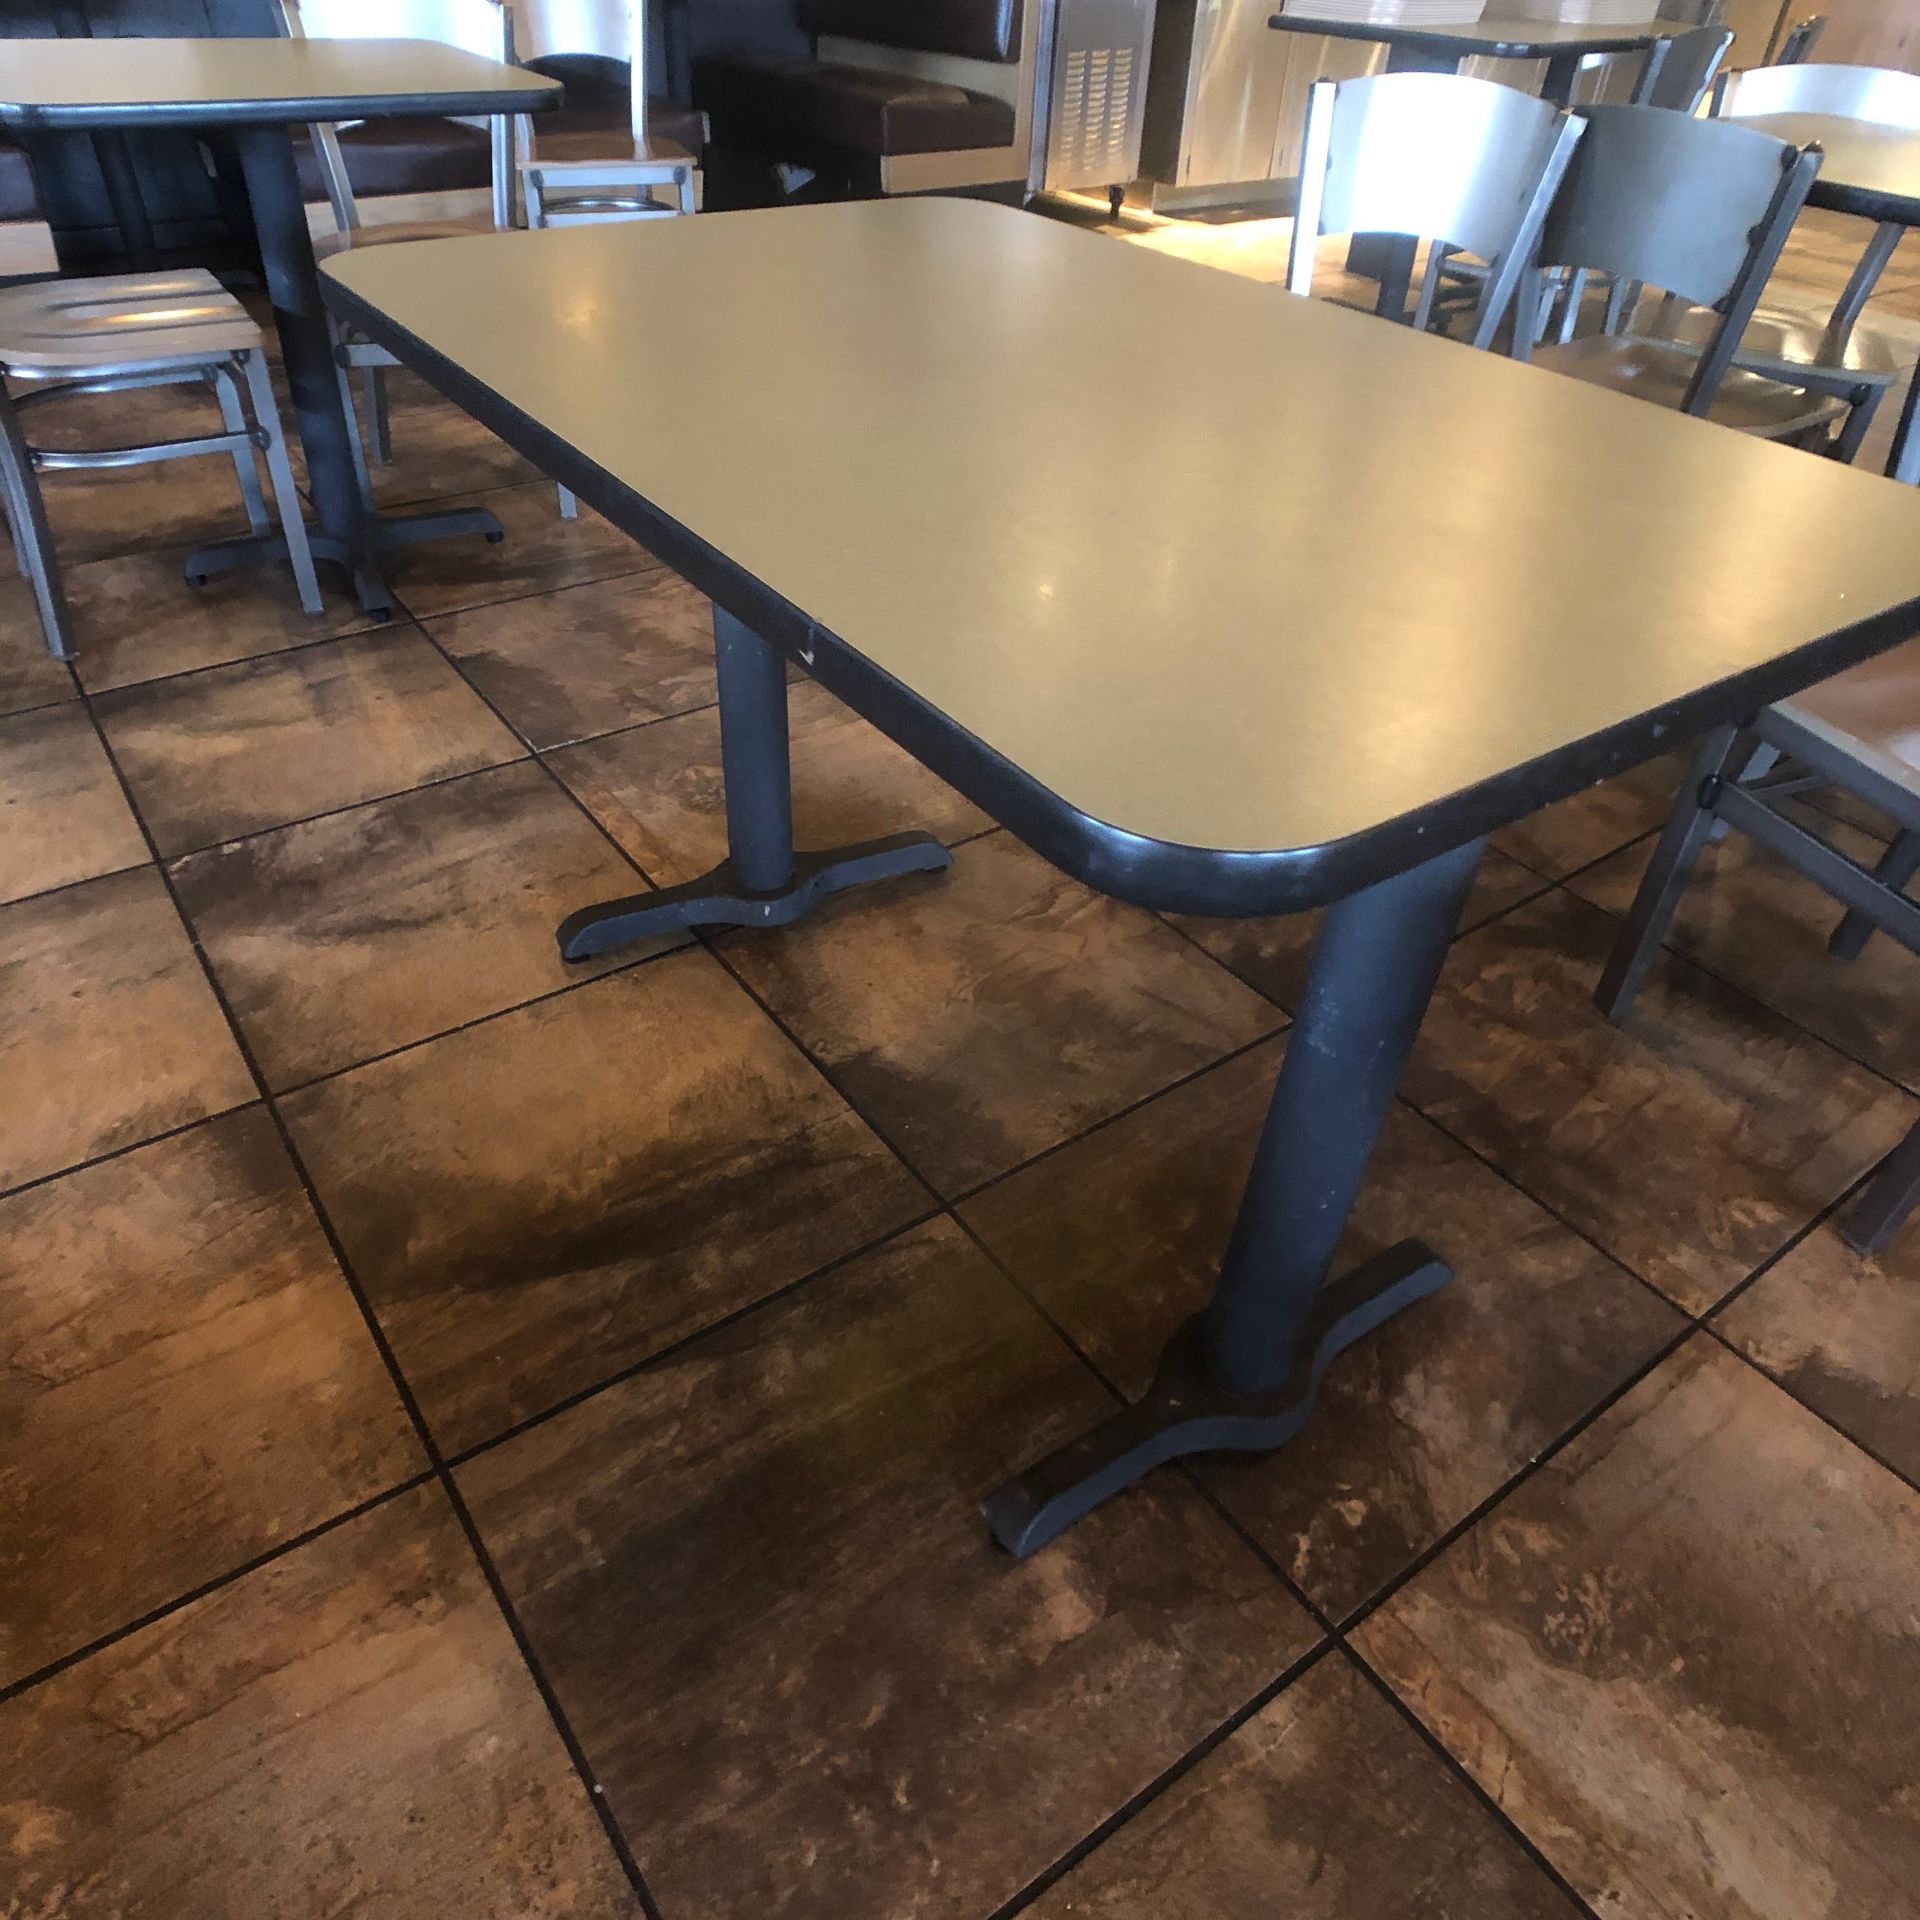 (6) 4-Person Tables with (24) Walsh Simmons Seating Chairs, Approx. 44" L x 28" W